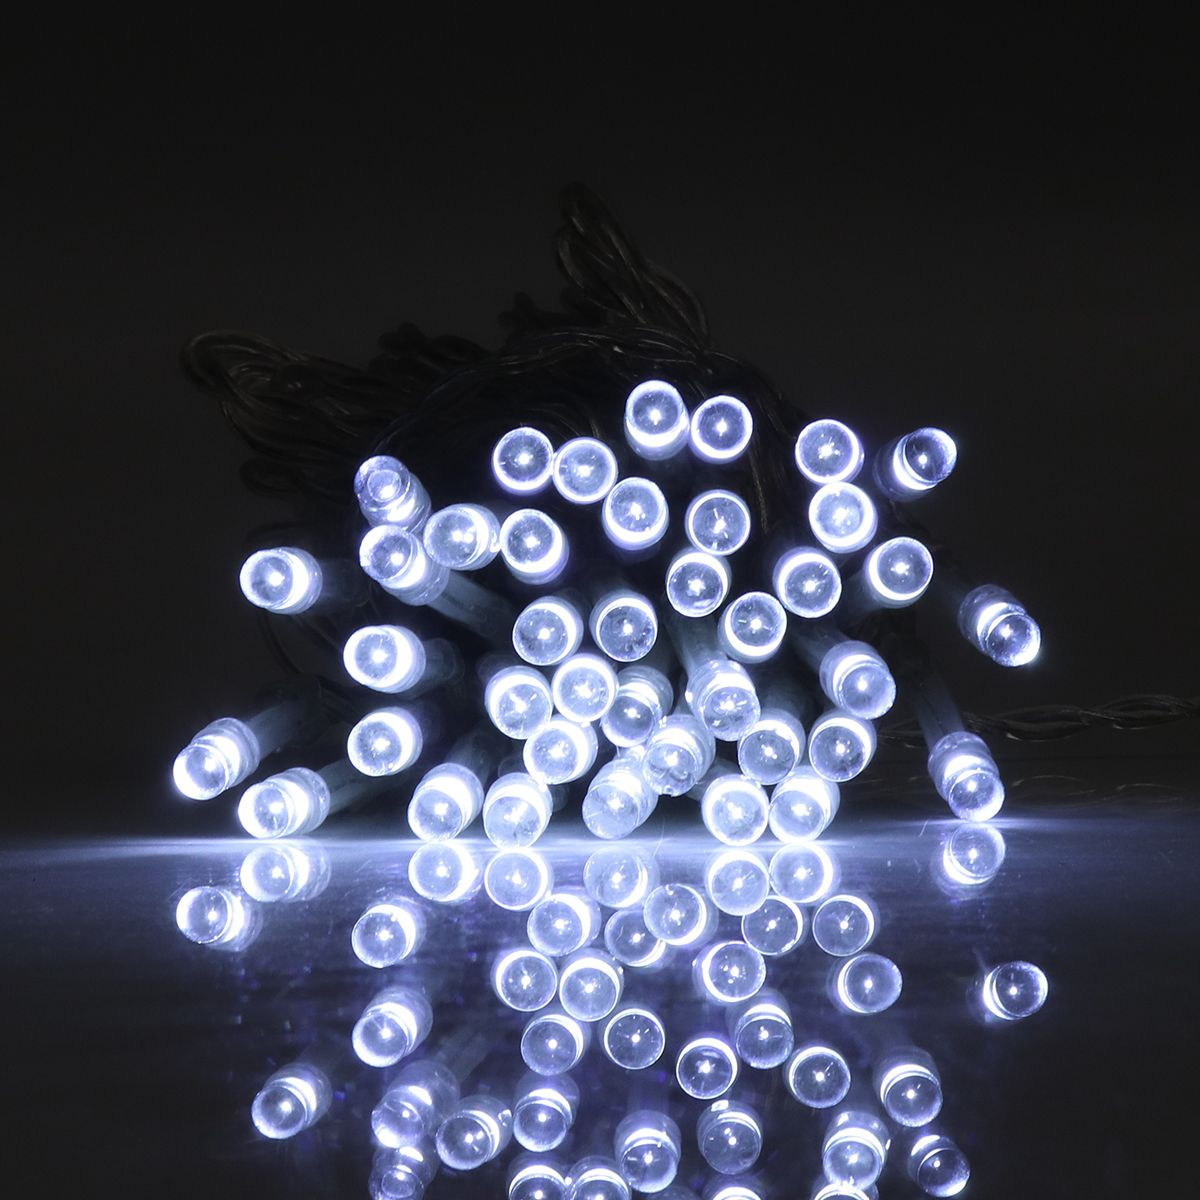 6M-8-Modes-Solar-Powered-40-LED-String-Light-Outdoor-Christmas-Holiday-Lamp-1381072